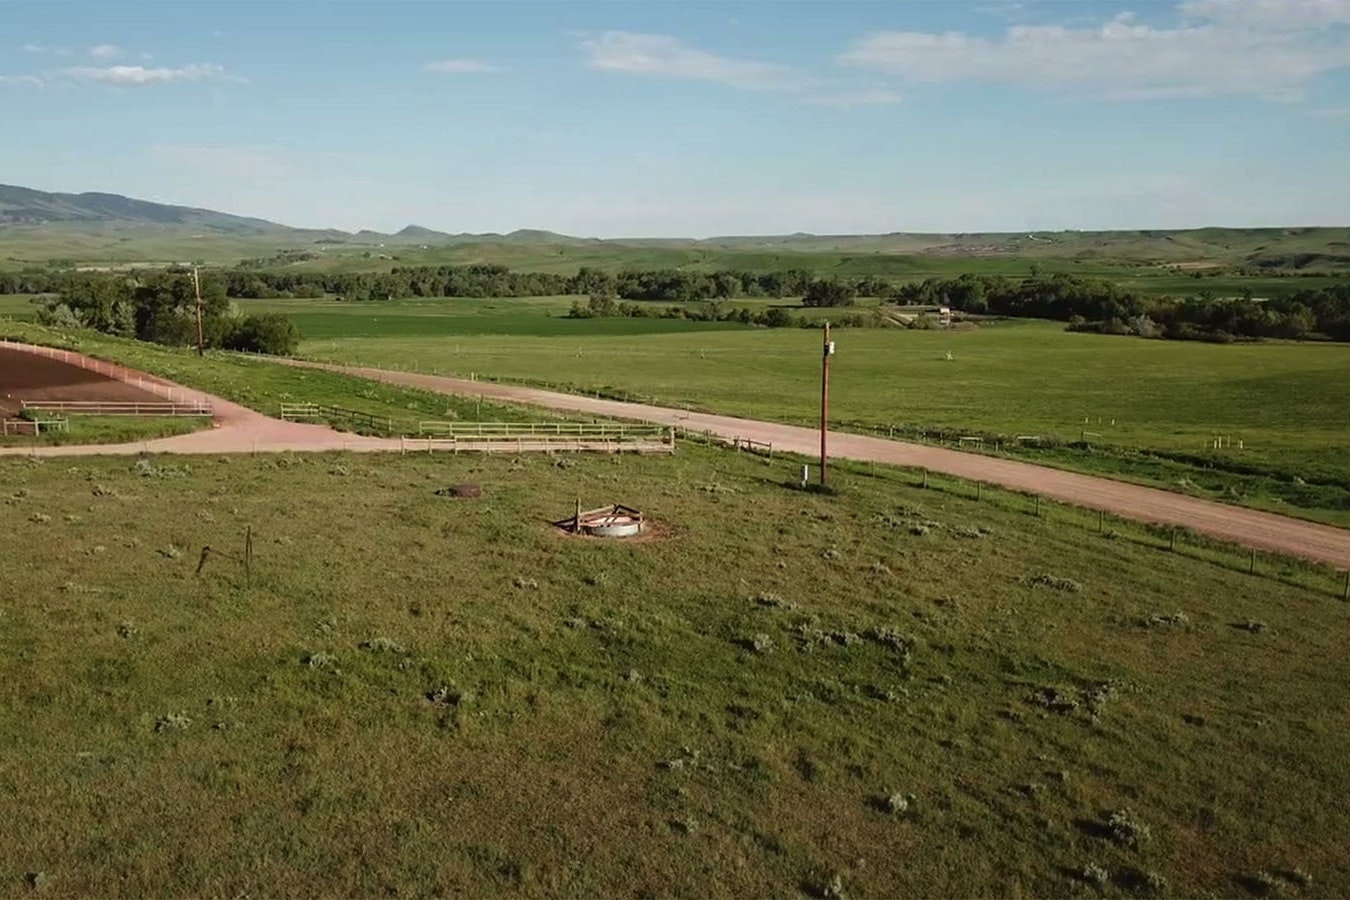 This nearly 630-acre tract of private land that's part of the Columbus Peak Ranch is one part of a controversial Sheridan County proposed land swap.